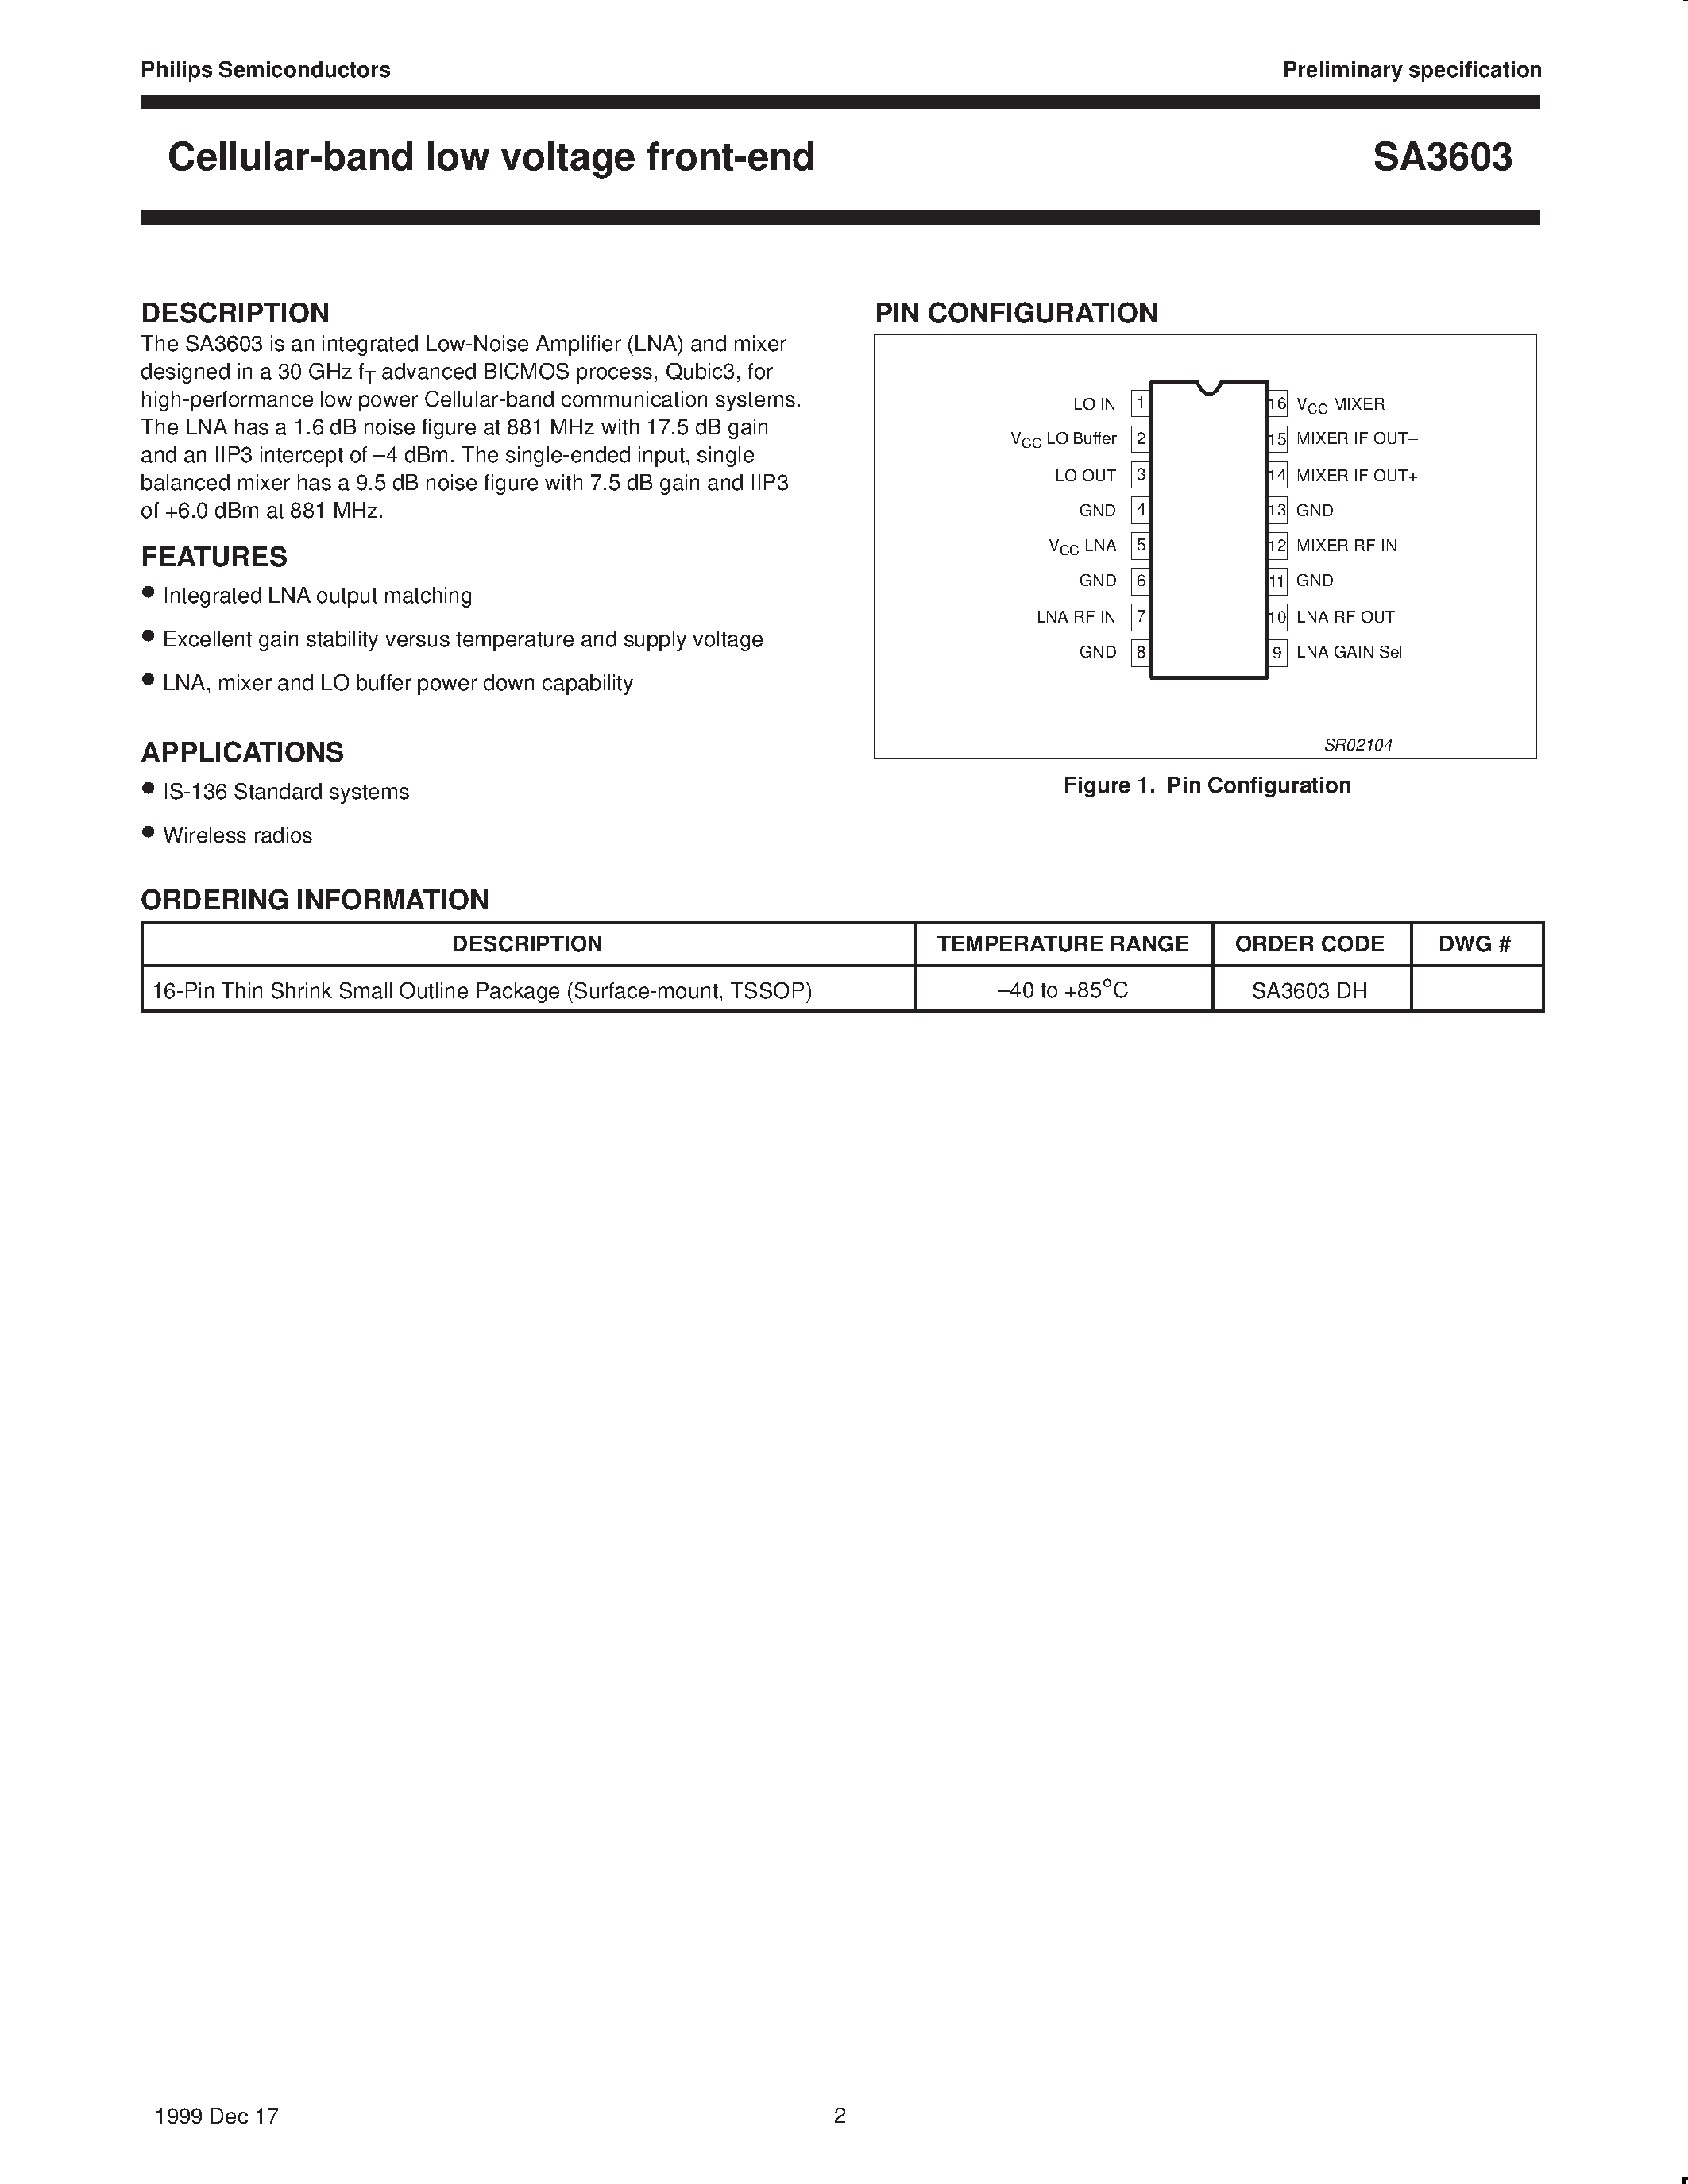 Datasheet SA3603 - Cellular-band low voltage front-end page 2